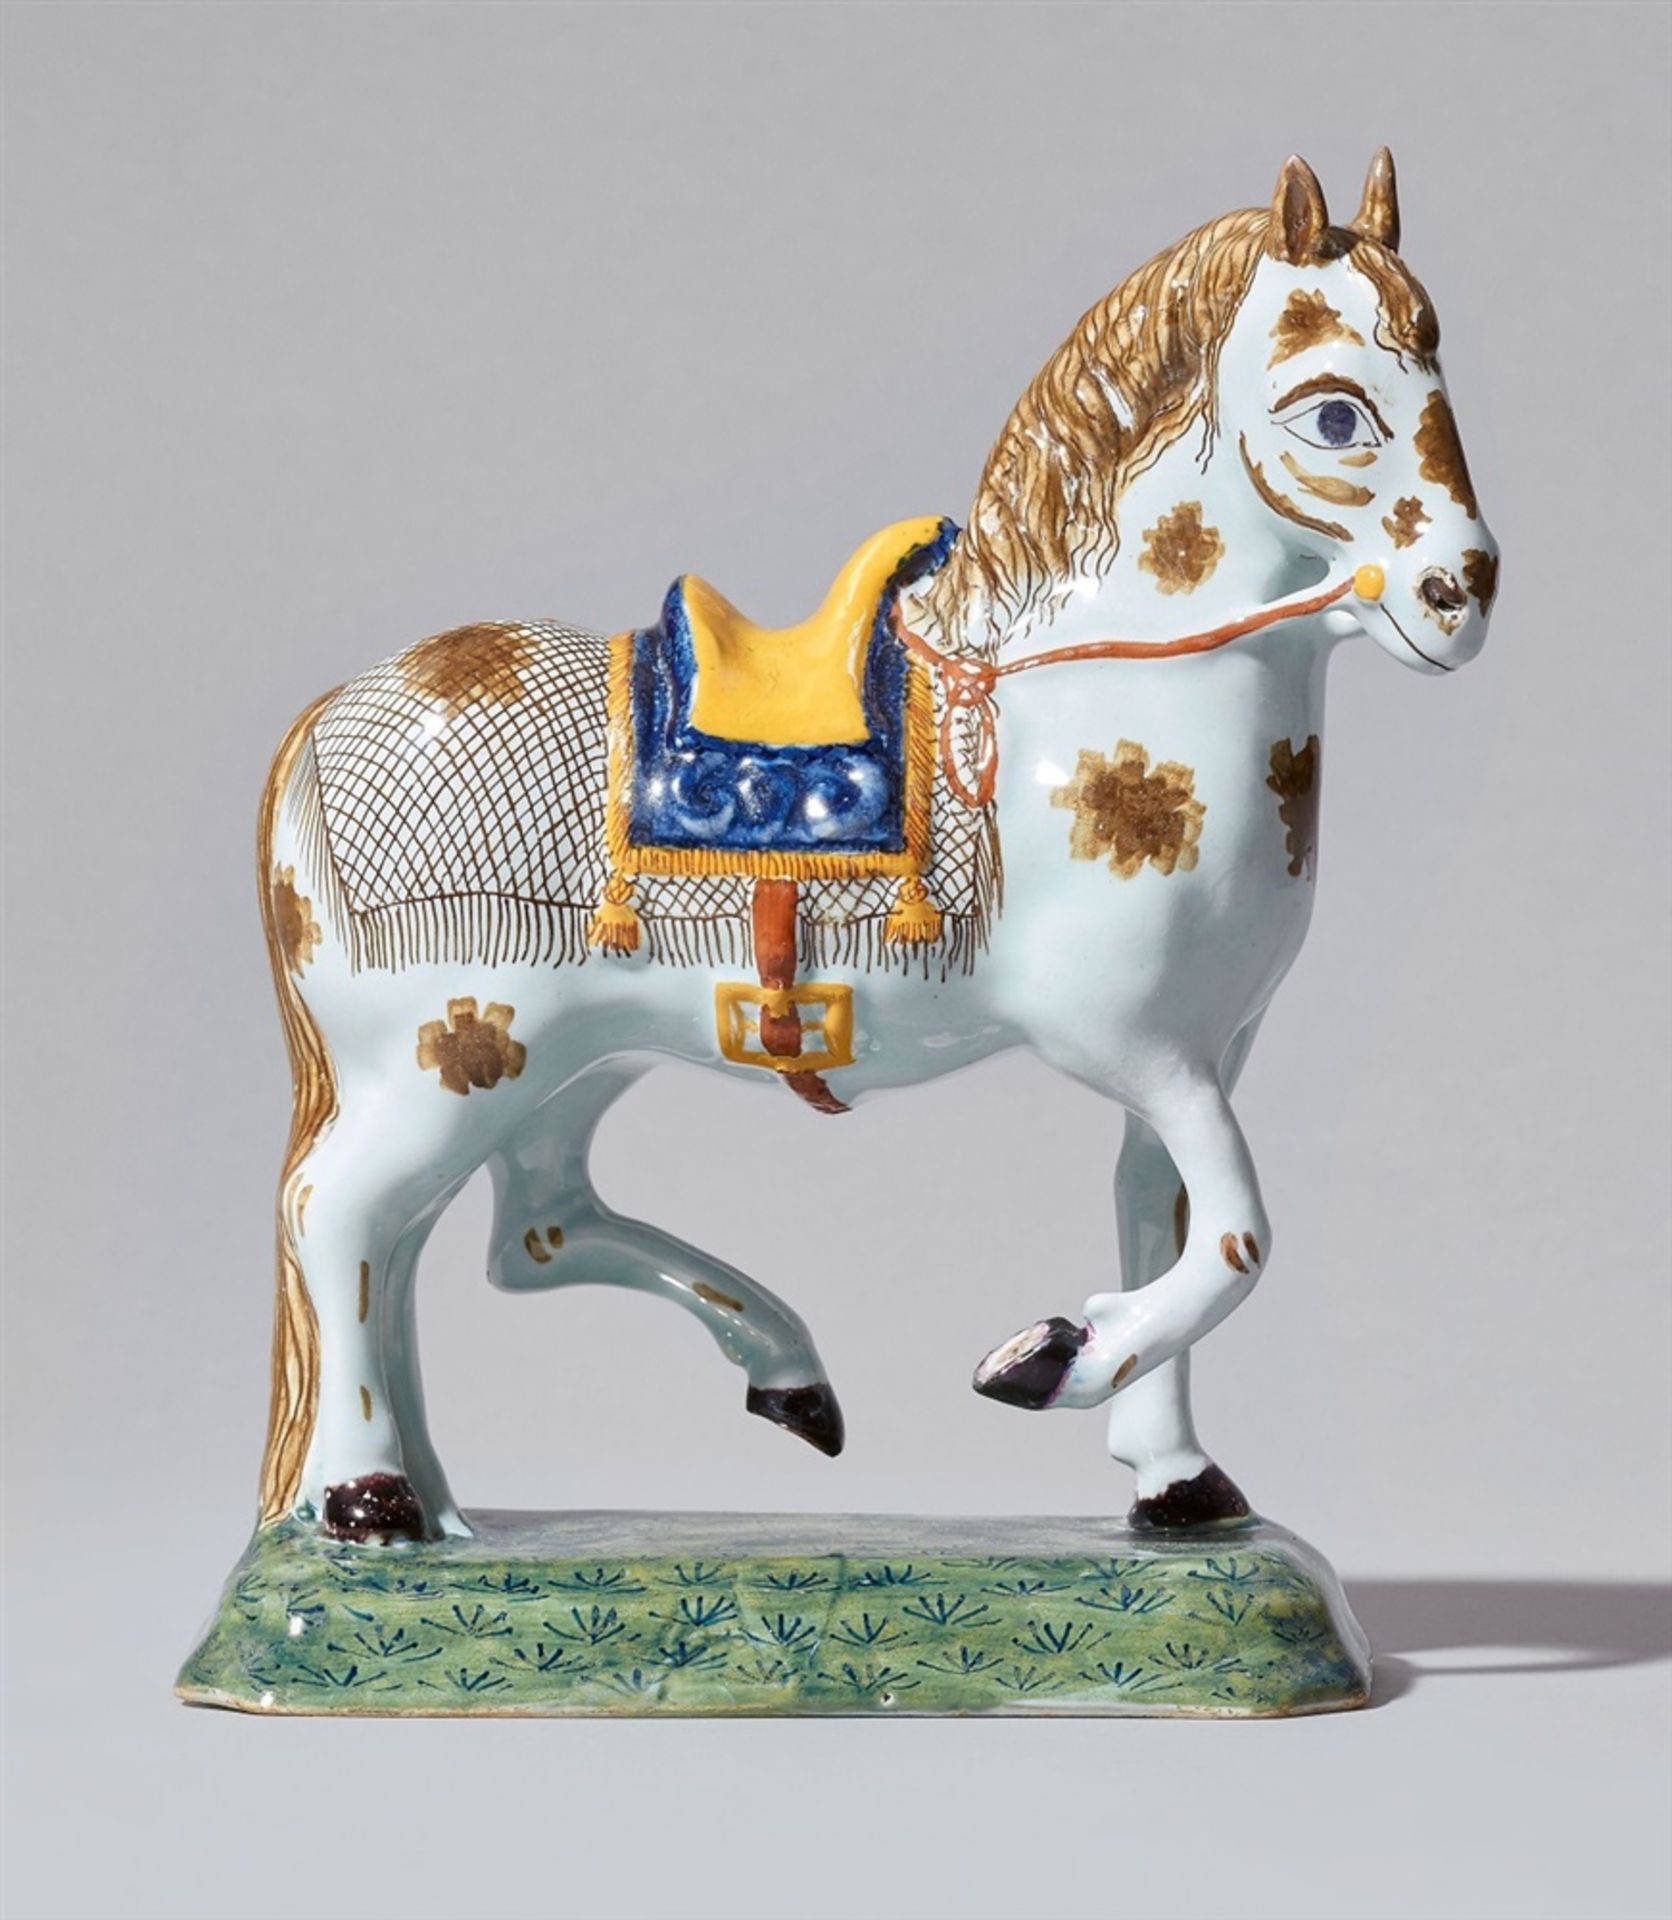 A Delftware faience model of a striding horseA horse with saddle, blanket and bridle on an oblong